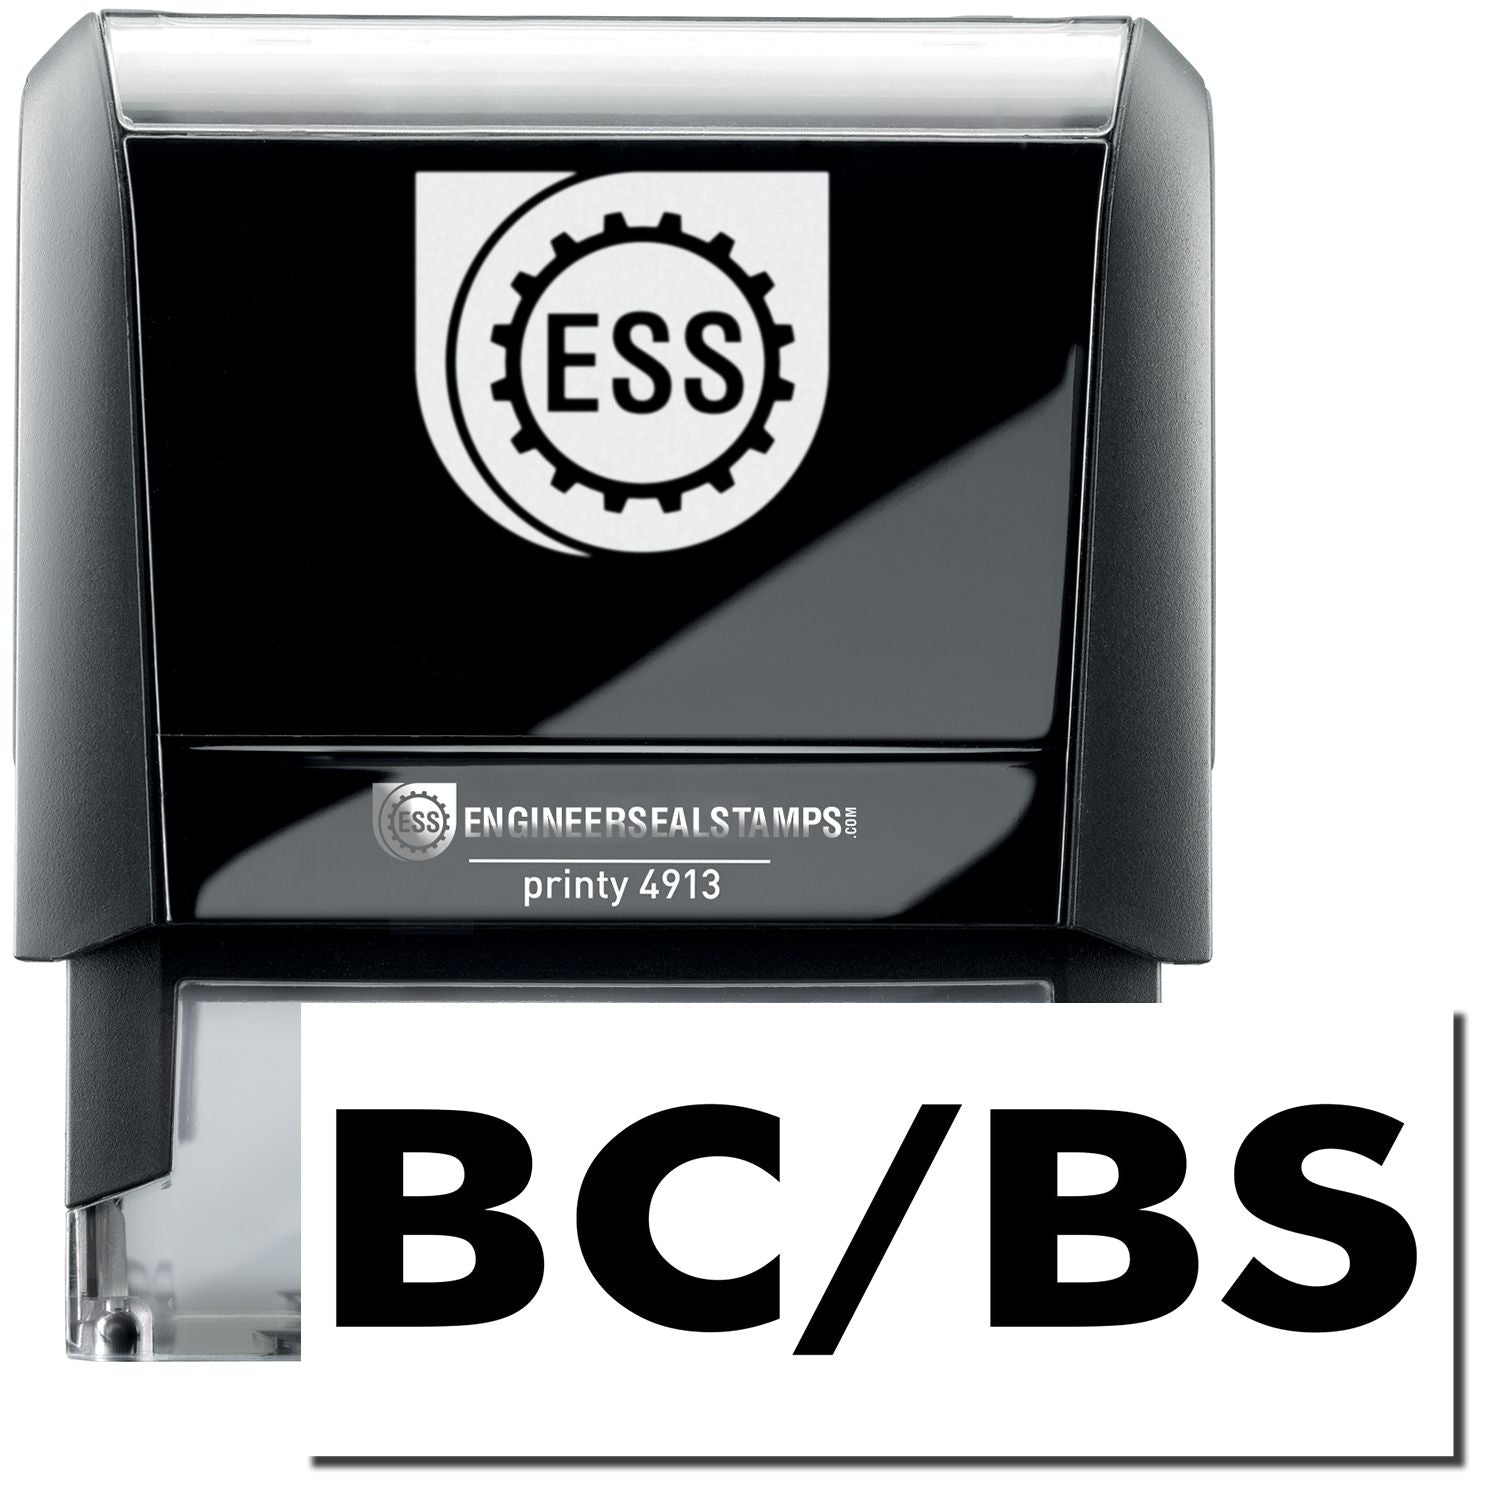 A self-inking stamp with a stamped image showing how the text "BC/BS" in a large bold font is displayed by it.